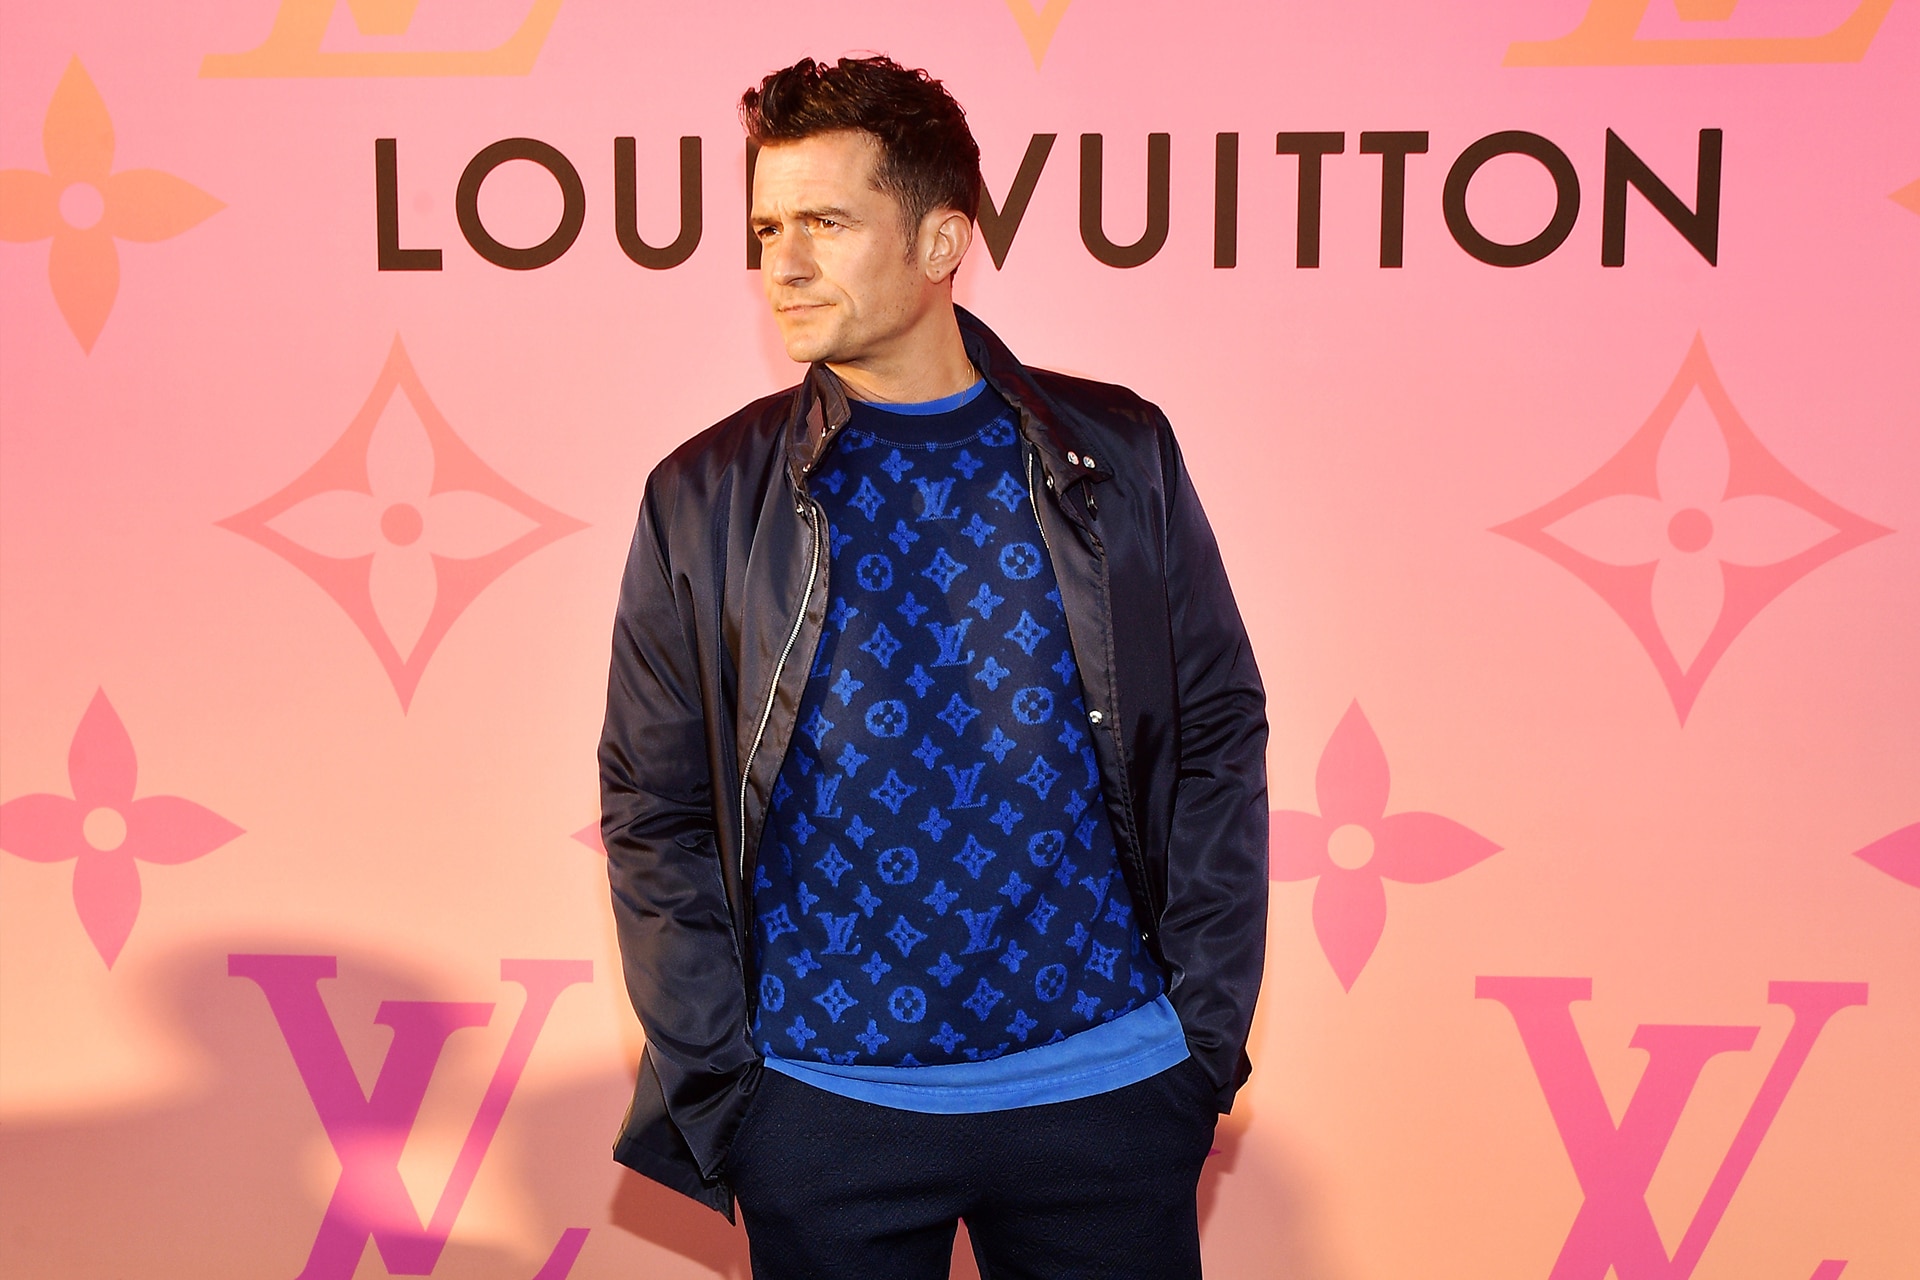 Statista - We know the brand Louis Vuitton, but do you know the man behind  the famous luxury house? 'He's the most famous man you know nothing about'  said Louis Vuitton CEO